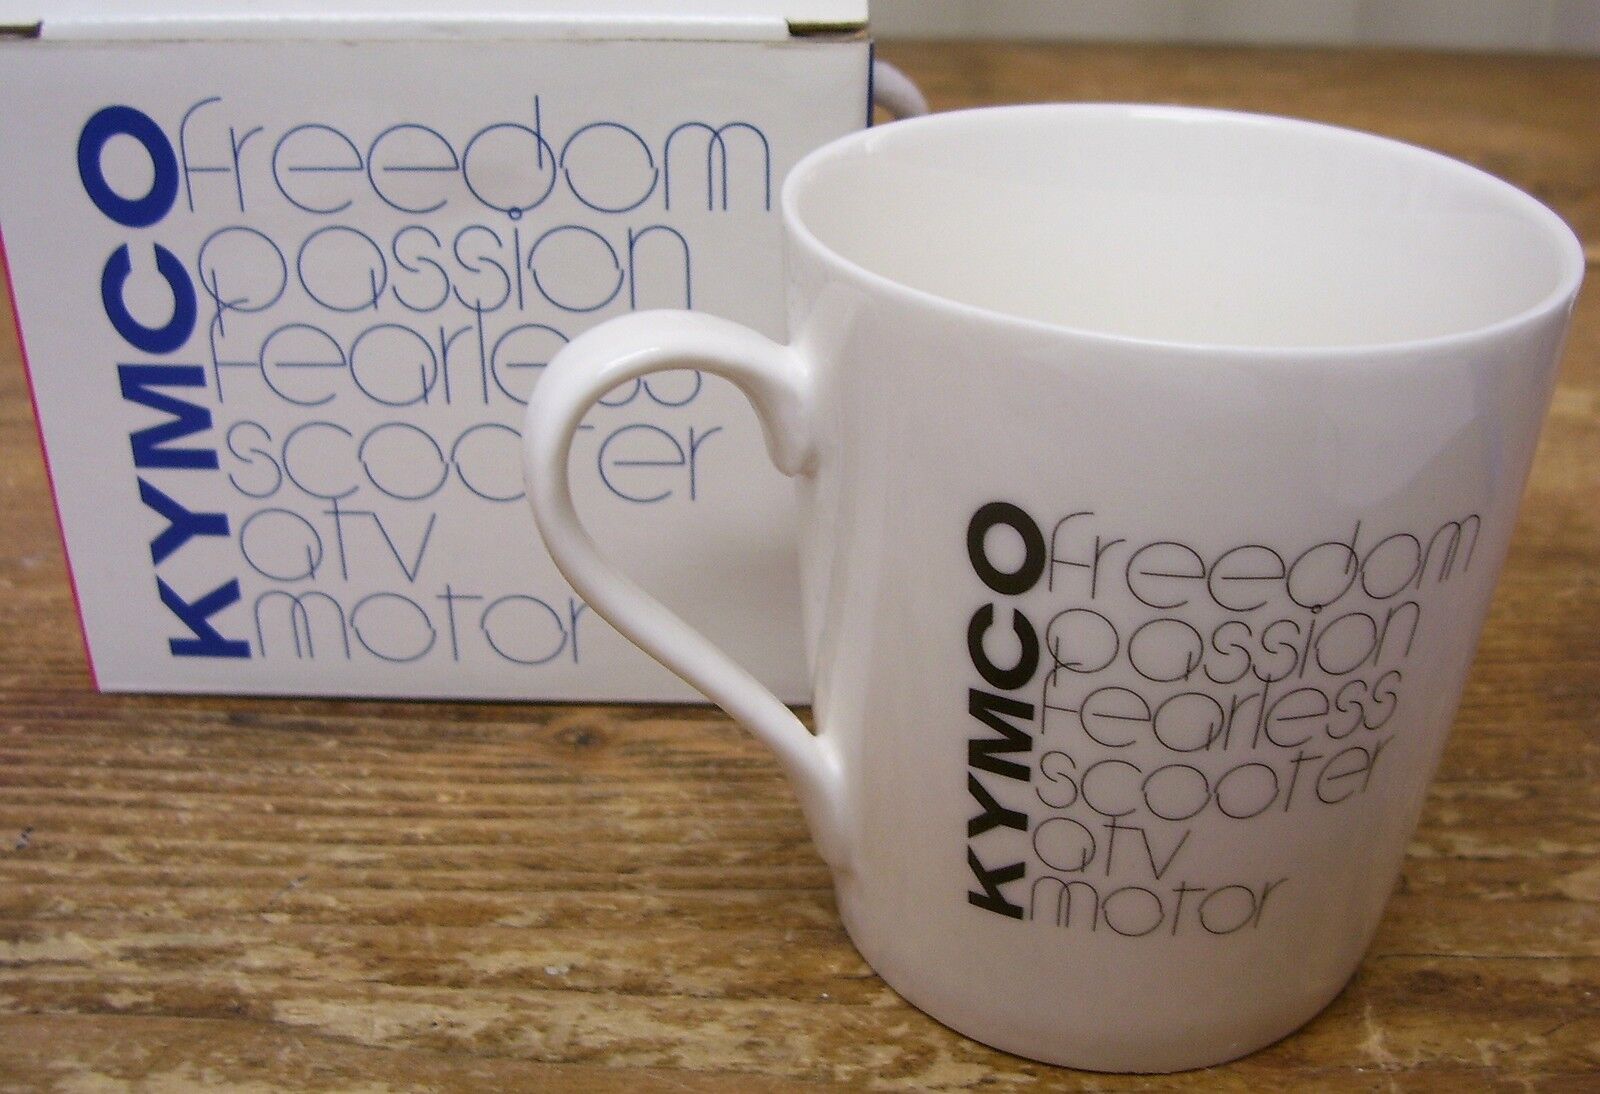 KYMCO Scooter Coffee Mug Cup Freedom Passion TV Motor Fearless New w Box